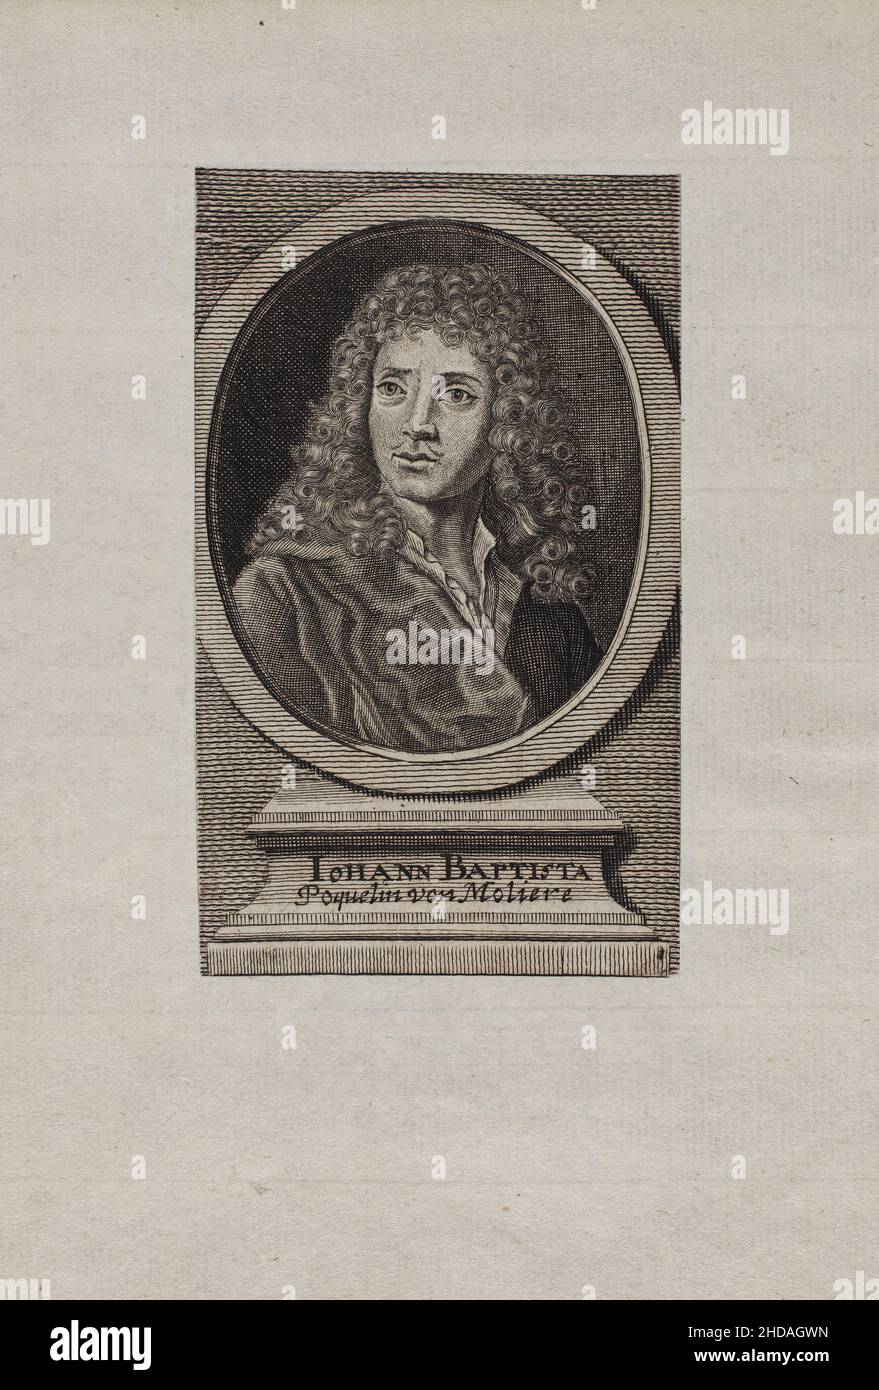 Engraving of Iohann Baptista Poquelin von Moliere. 1660 Jean-Baptiste Poquelin (1622 – 1673), known by his stage name Molière, was a French playwright Stock Photo